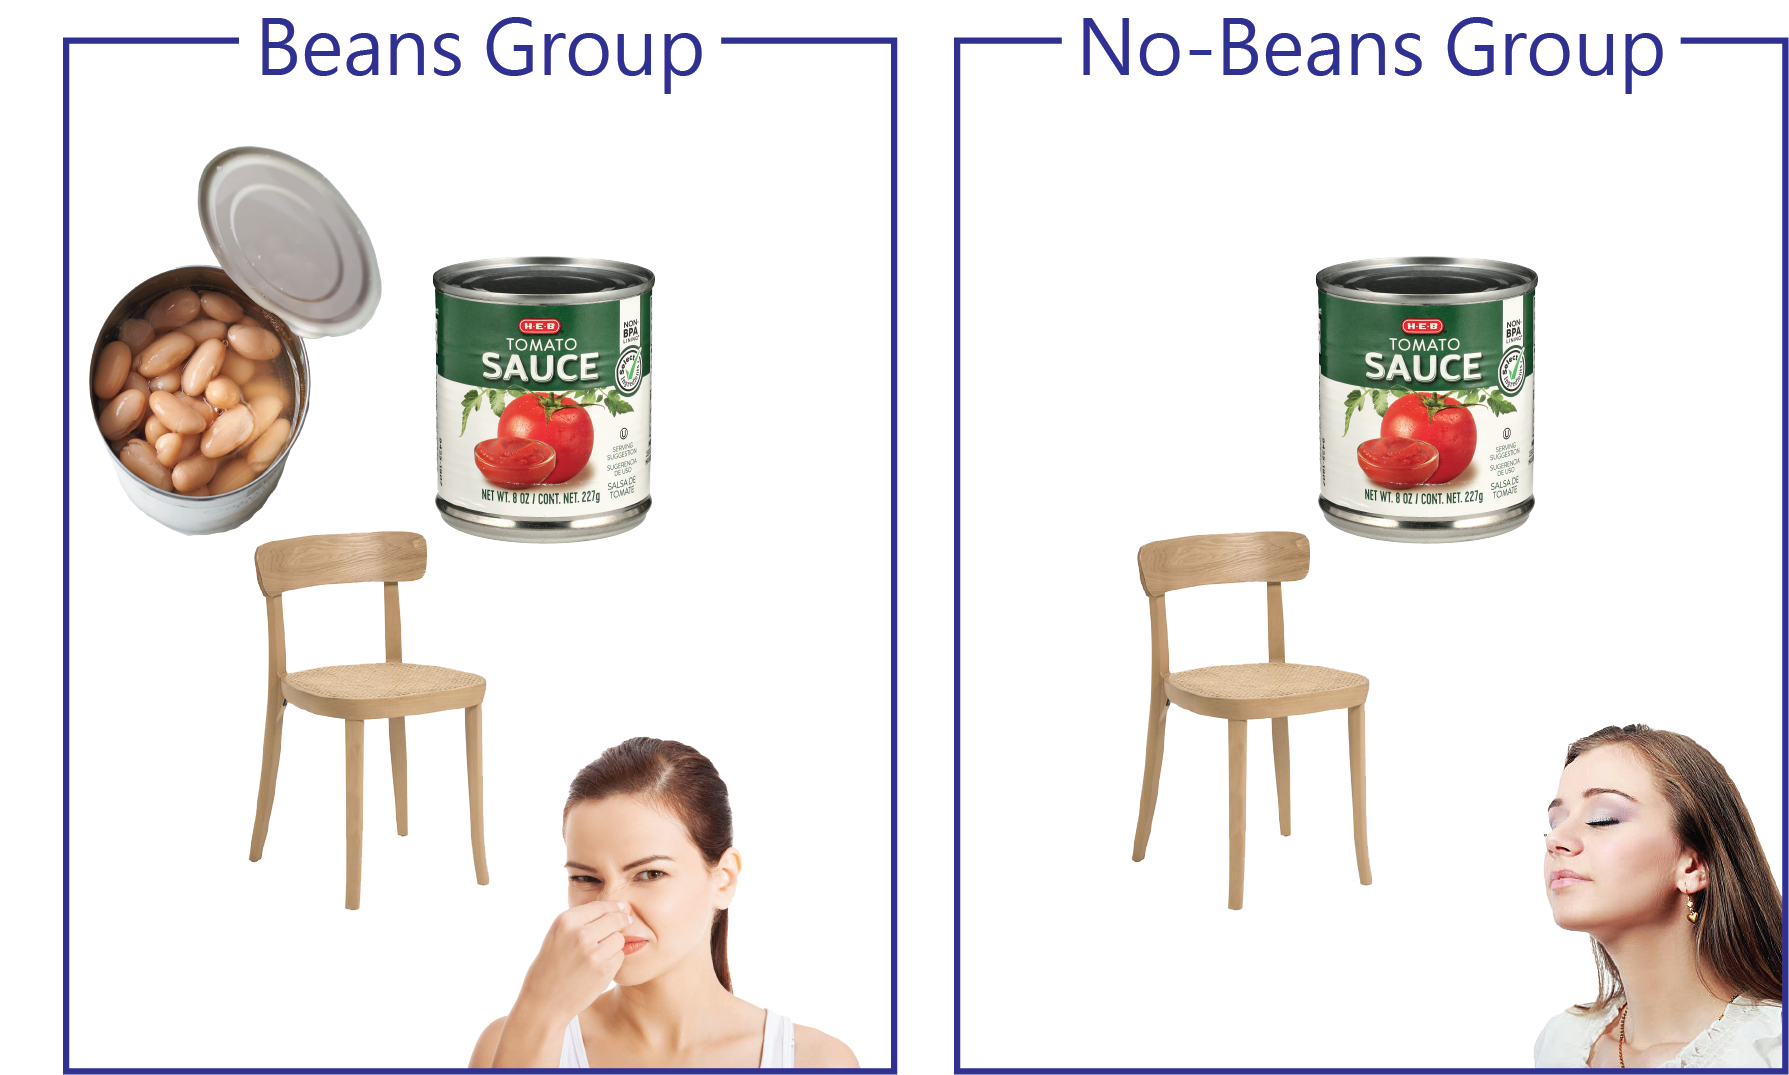 Schematic of imaginary experiment with a beans group and no beans group. Presence of flatulence is depicted by two women, one holding her nose and the other sniffing the air happily.